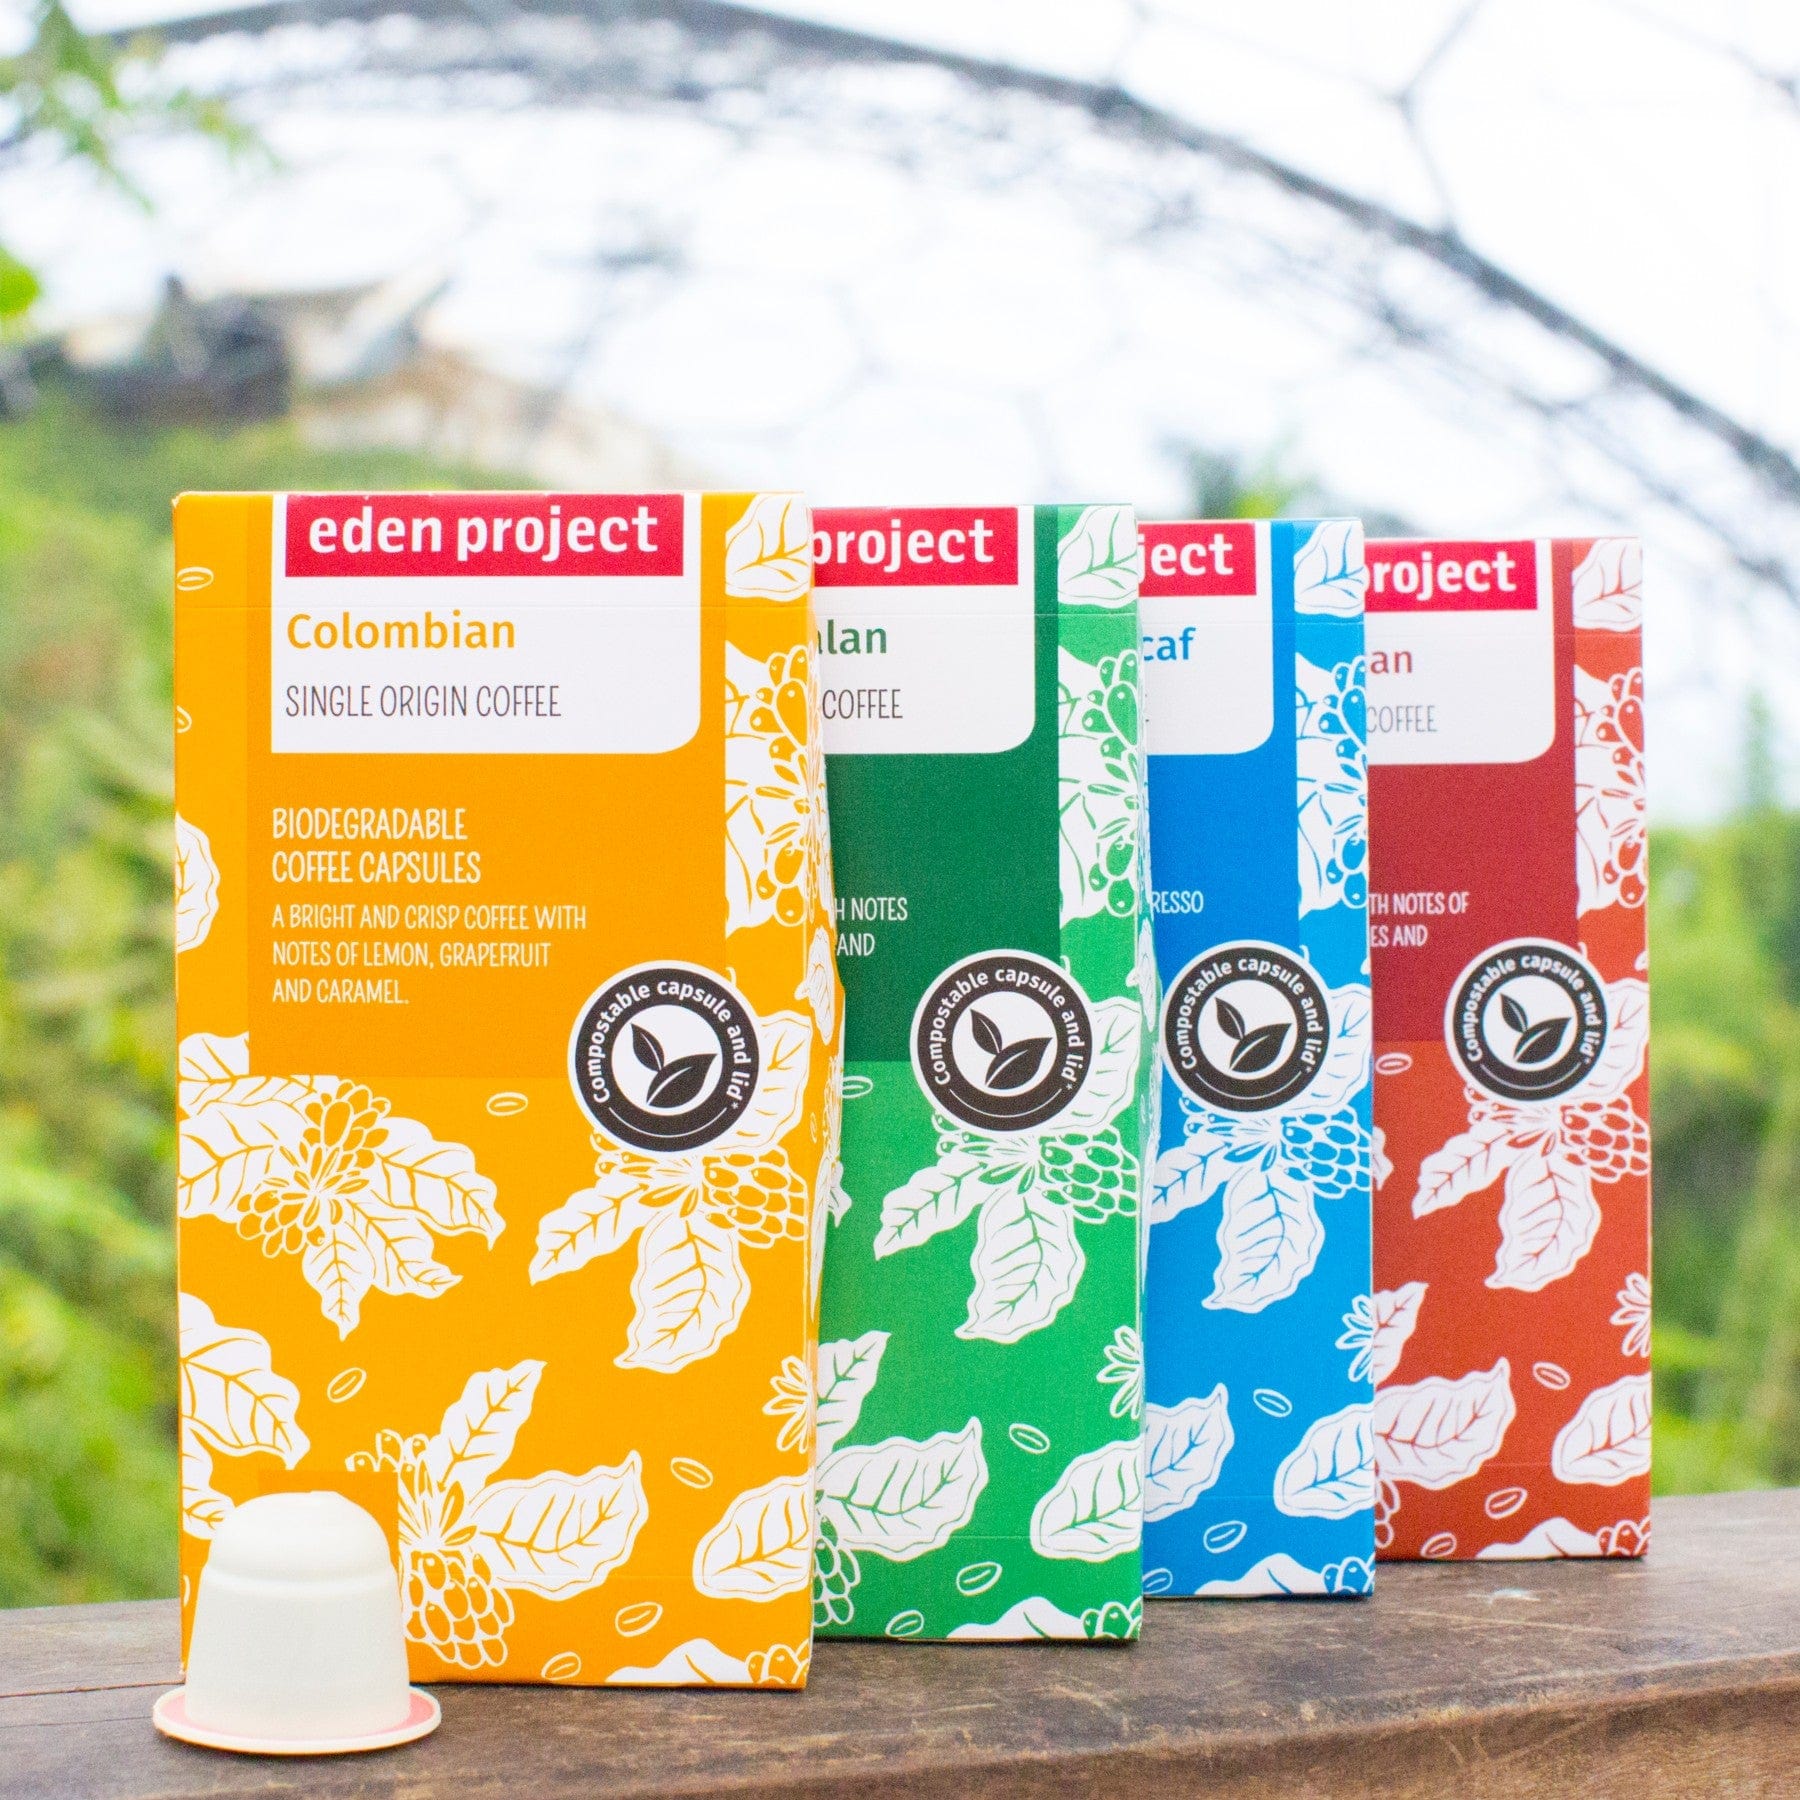 Four colorful Eden Project biodegradable coffee capsules packaging aligned outdoors with Colombian, Italian, Decaf varieties, and espresso cup in the foreground.